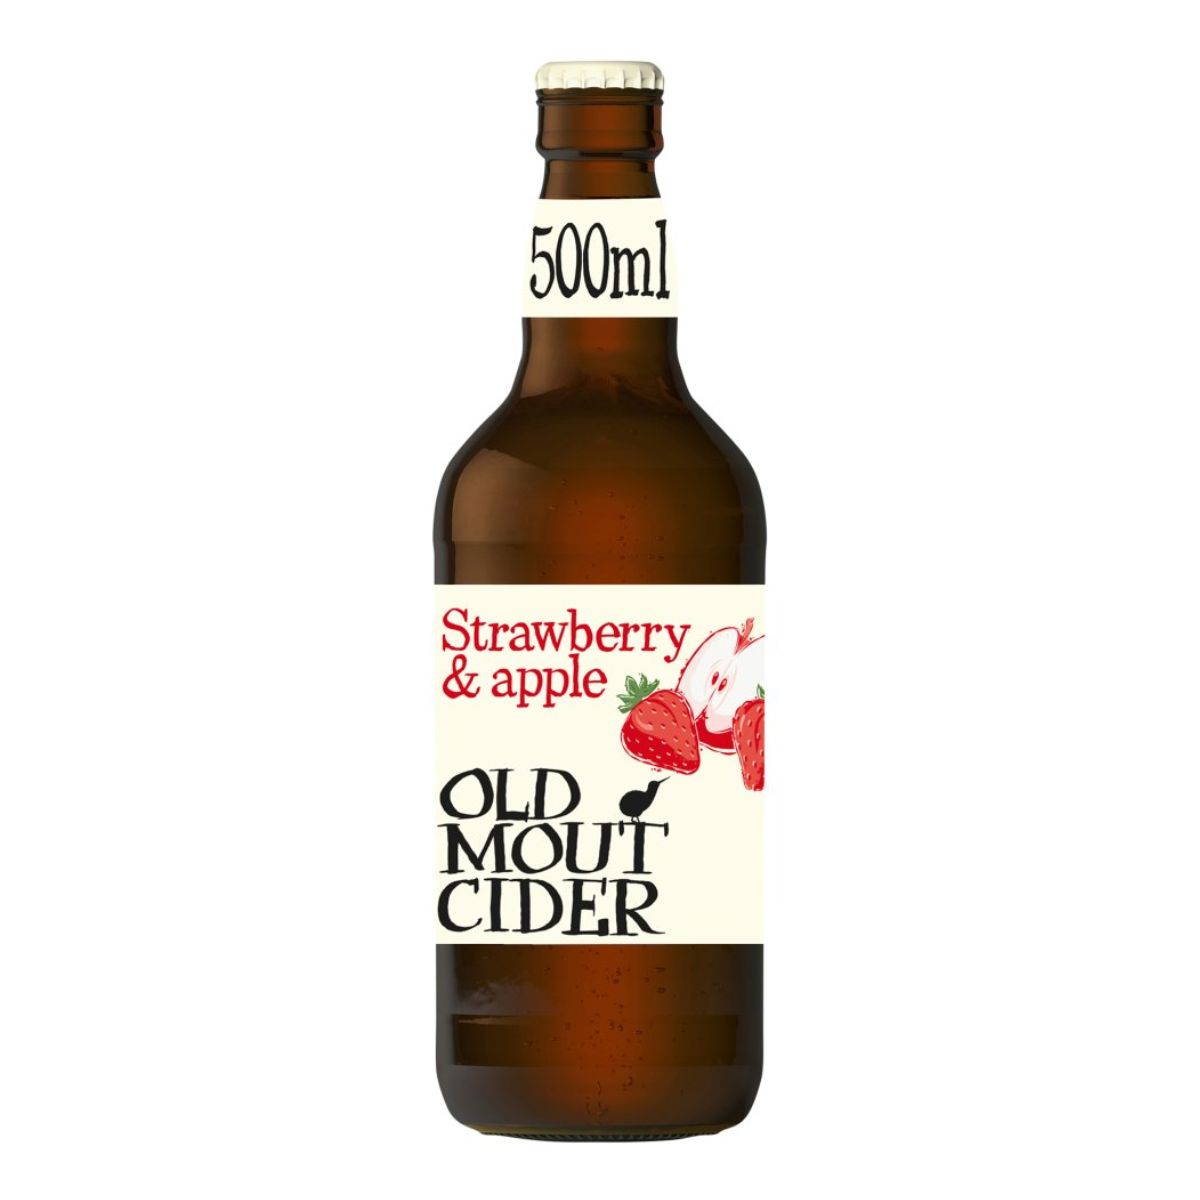 Strawberry & apple Old Mout Cider 500ml.